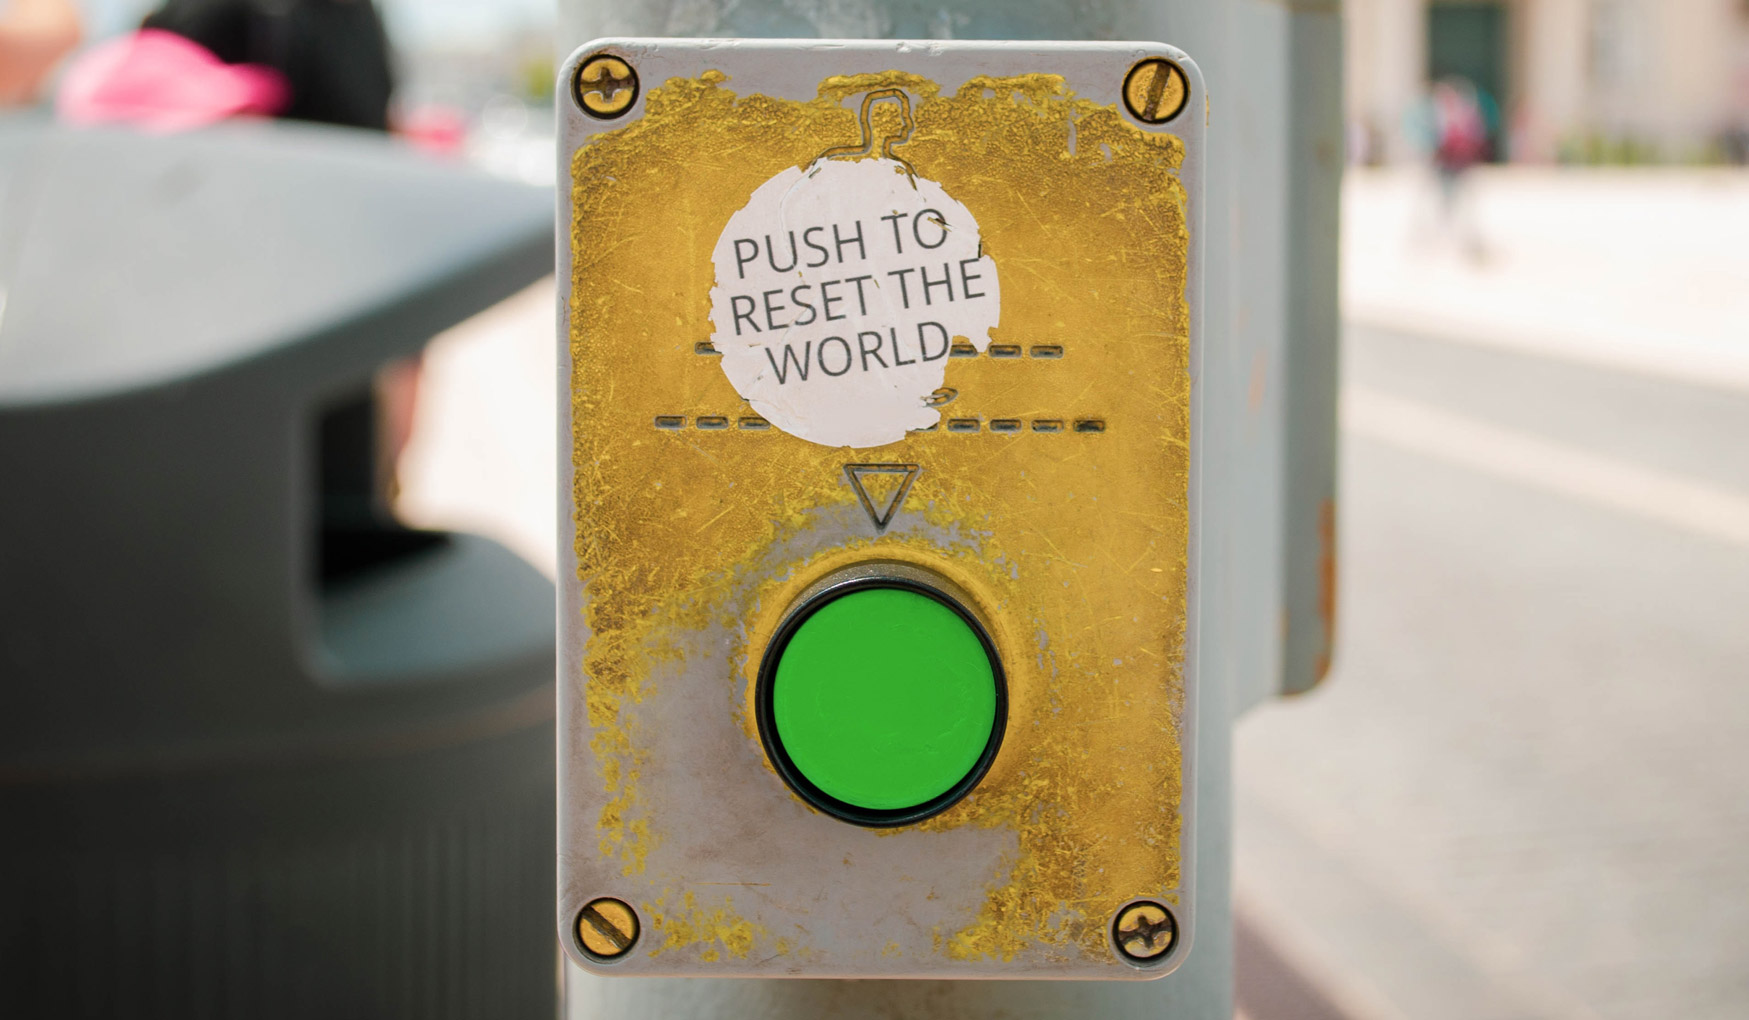 Crosswalk button affixed with a sticker saying, "push to reset the world".